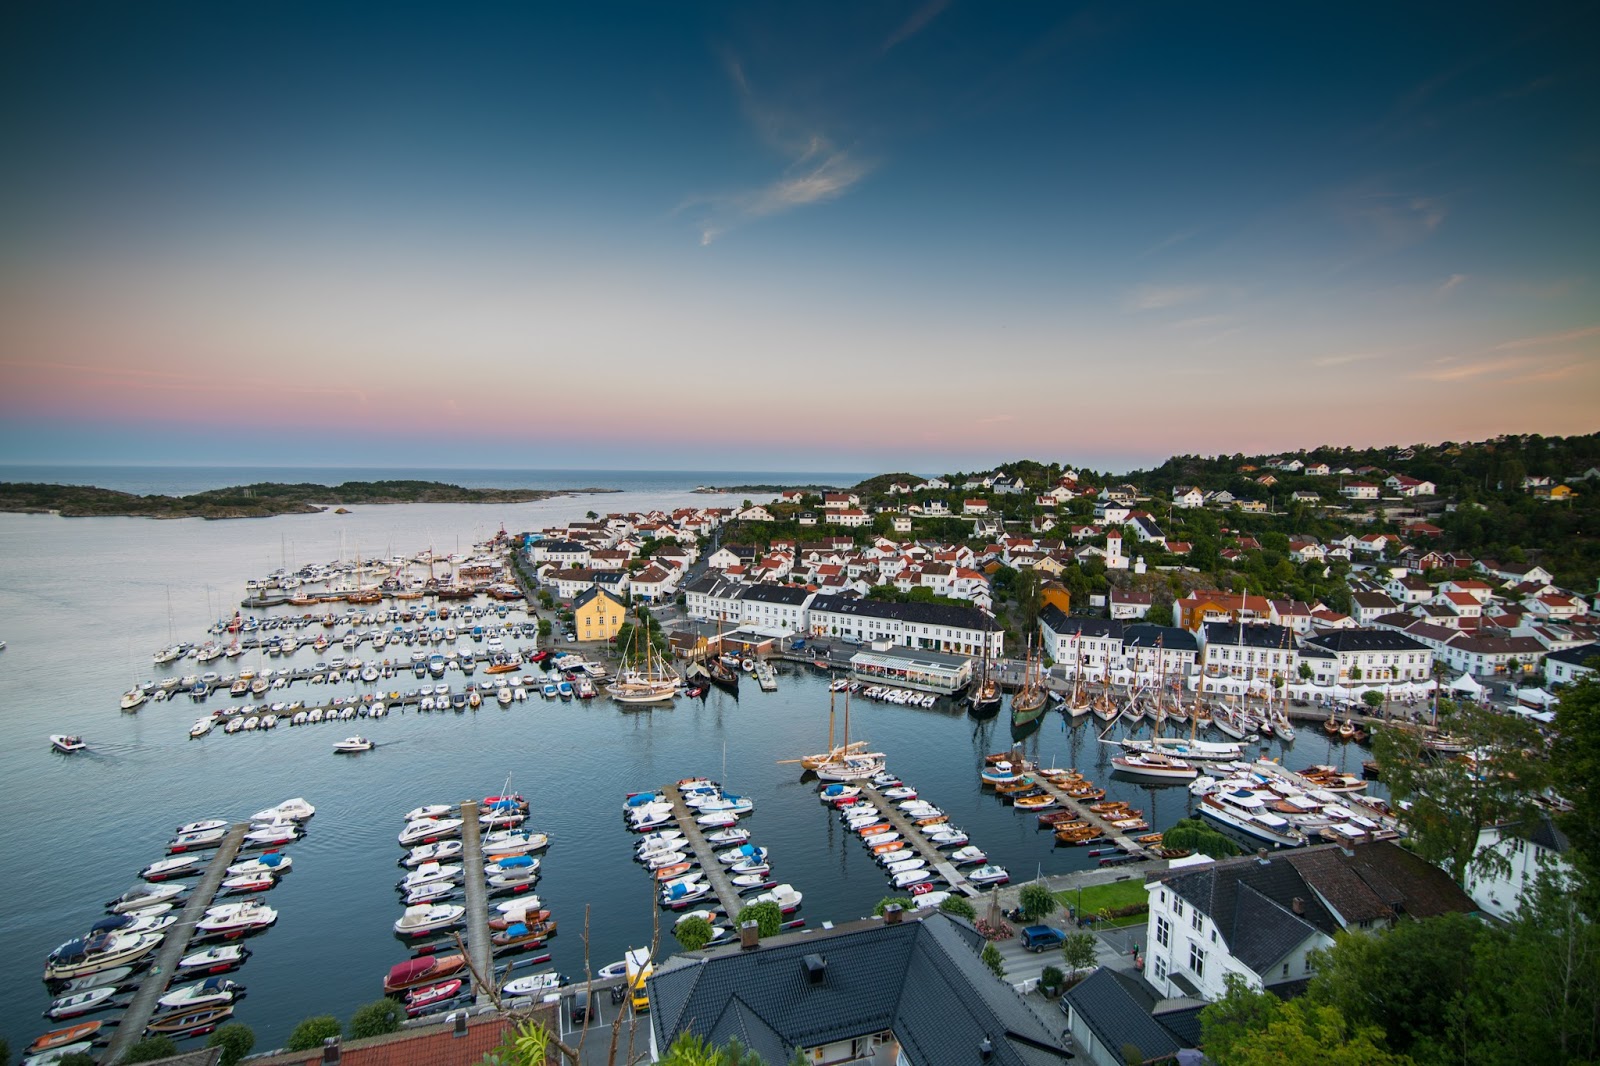 Visit Southern Norway: The wooden boat festival Risør